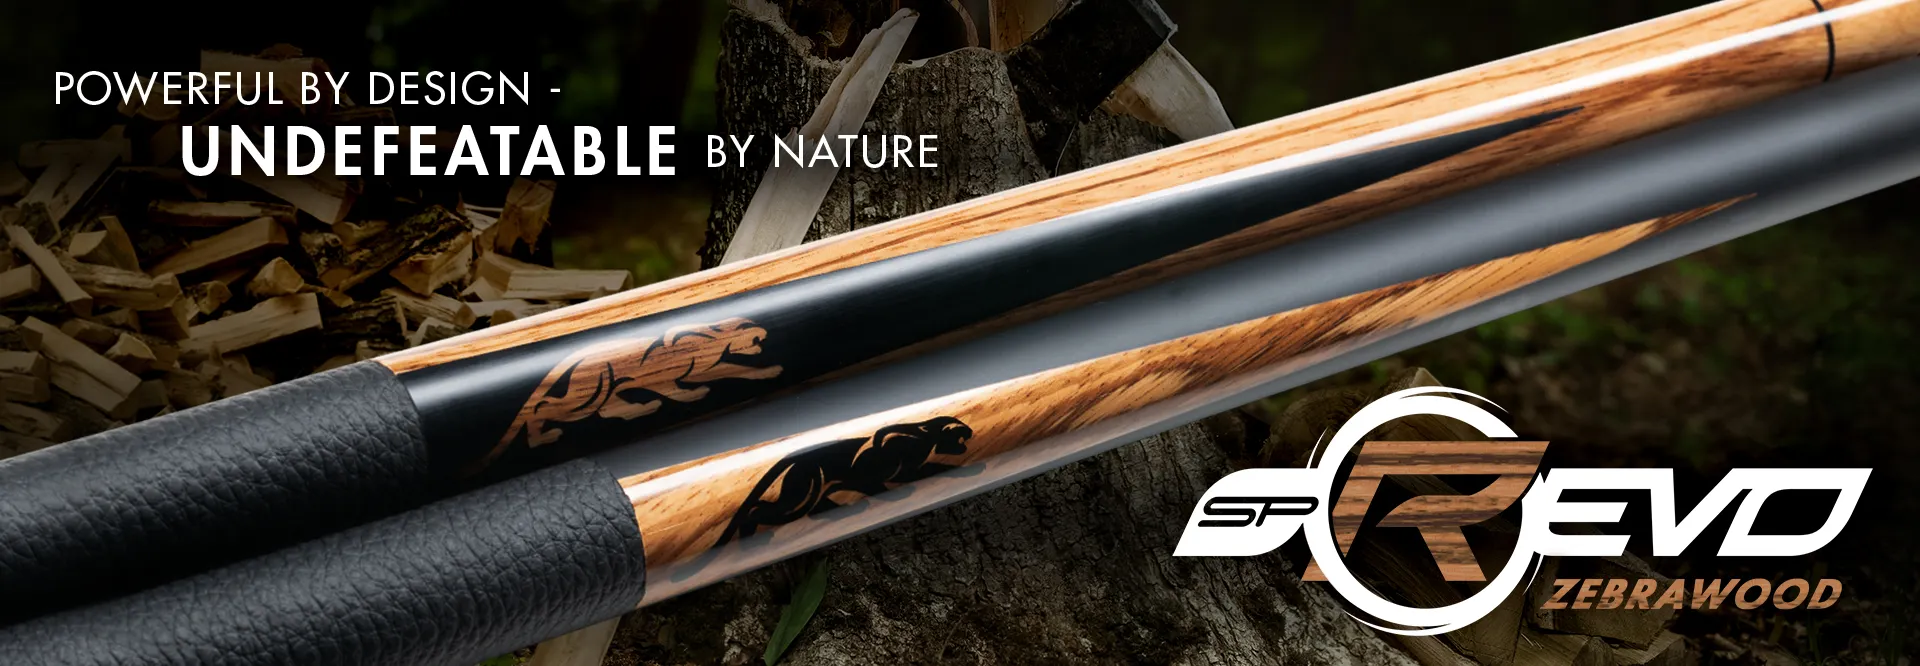 SP2 REVO Limited Edition Pool Cues